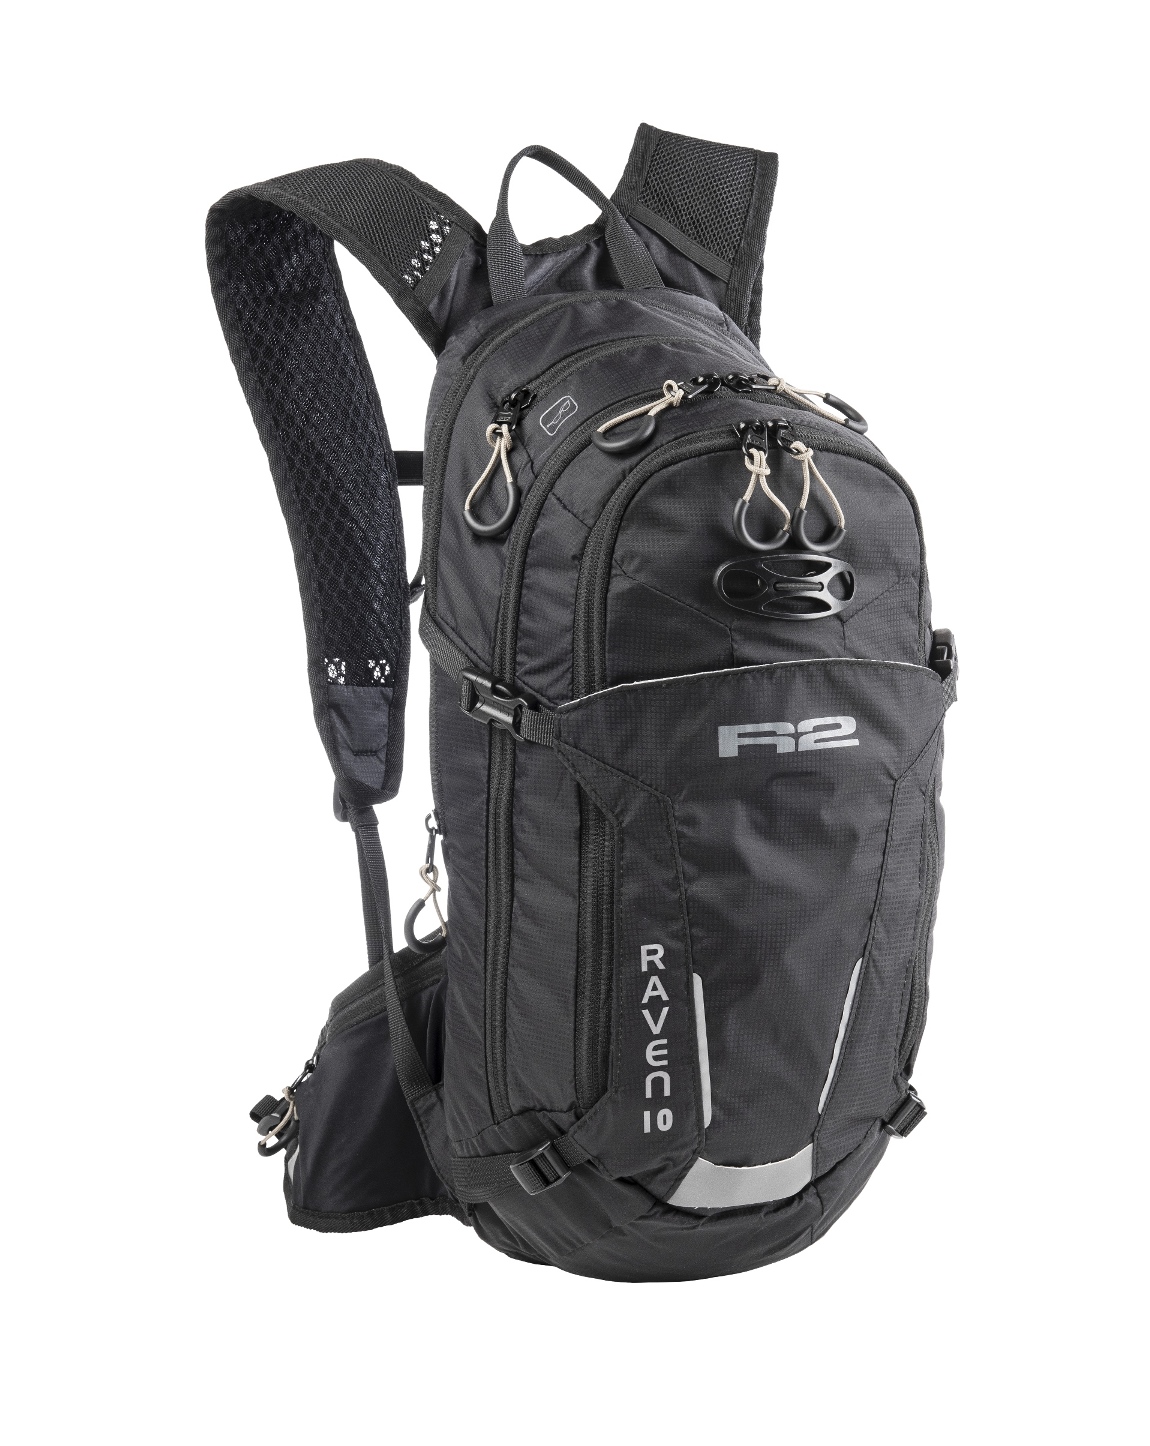 SPORT BACKPACK R2 TRACKER ATBP04A 10L